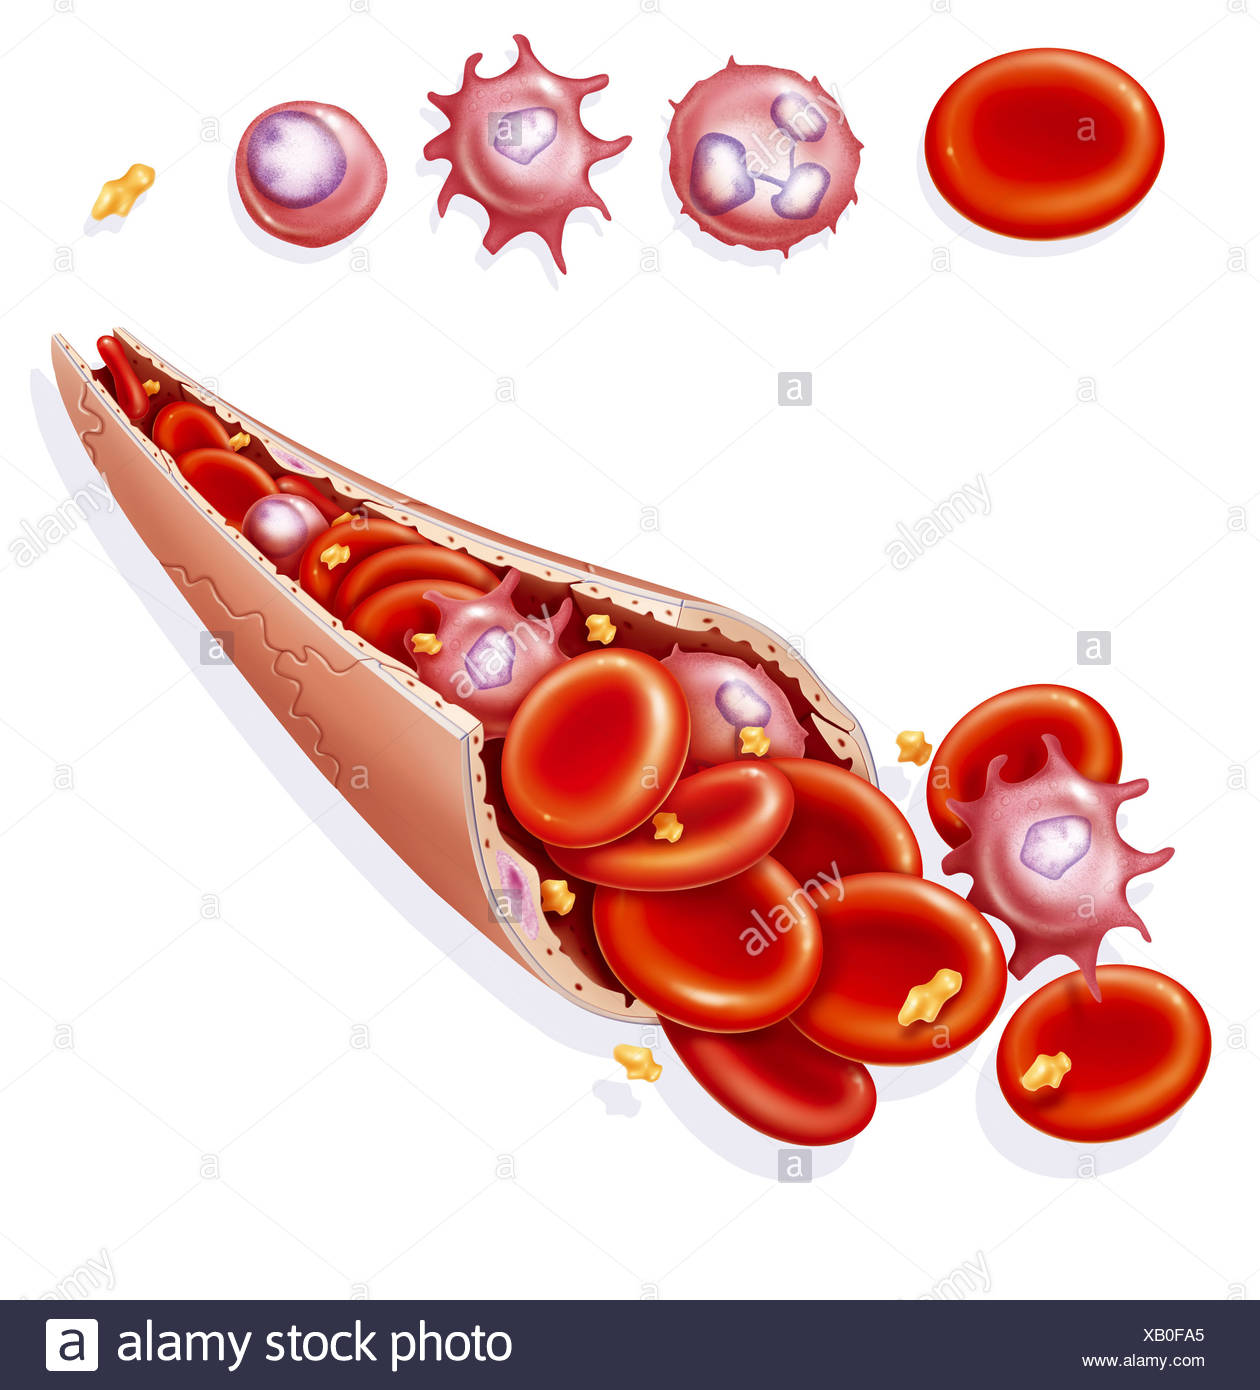 Red And White Blood Cells Diagram - Aflam-Neeeak